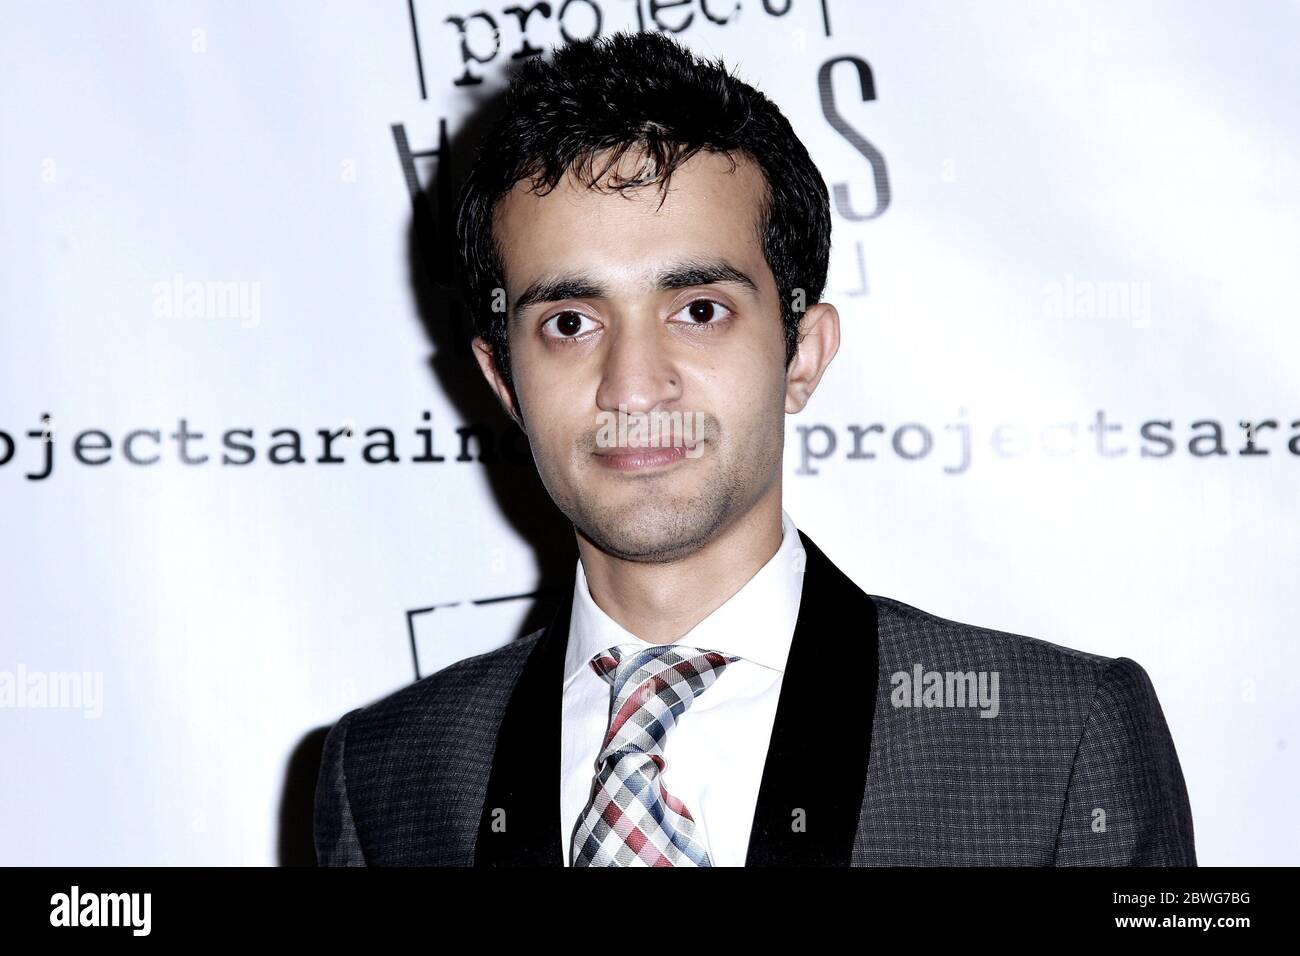 New York, NY, USA. 11 June, 2015. Project Sara Inc. Co-Founder, Viraj Borkar at the Launch Of Dining Reconstructed: An Off Menu Experience at The Starrett Leigh Building. Credit: Steve Mack/Alamy Stock Photo